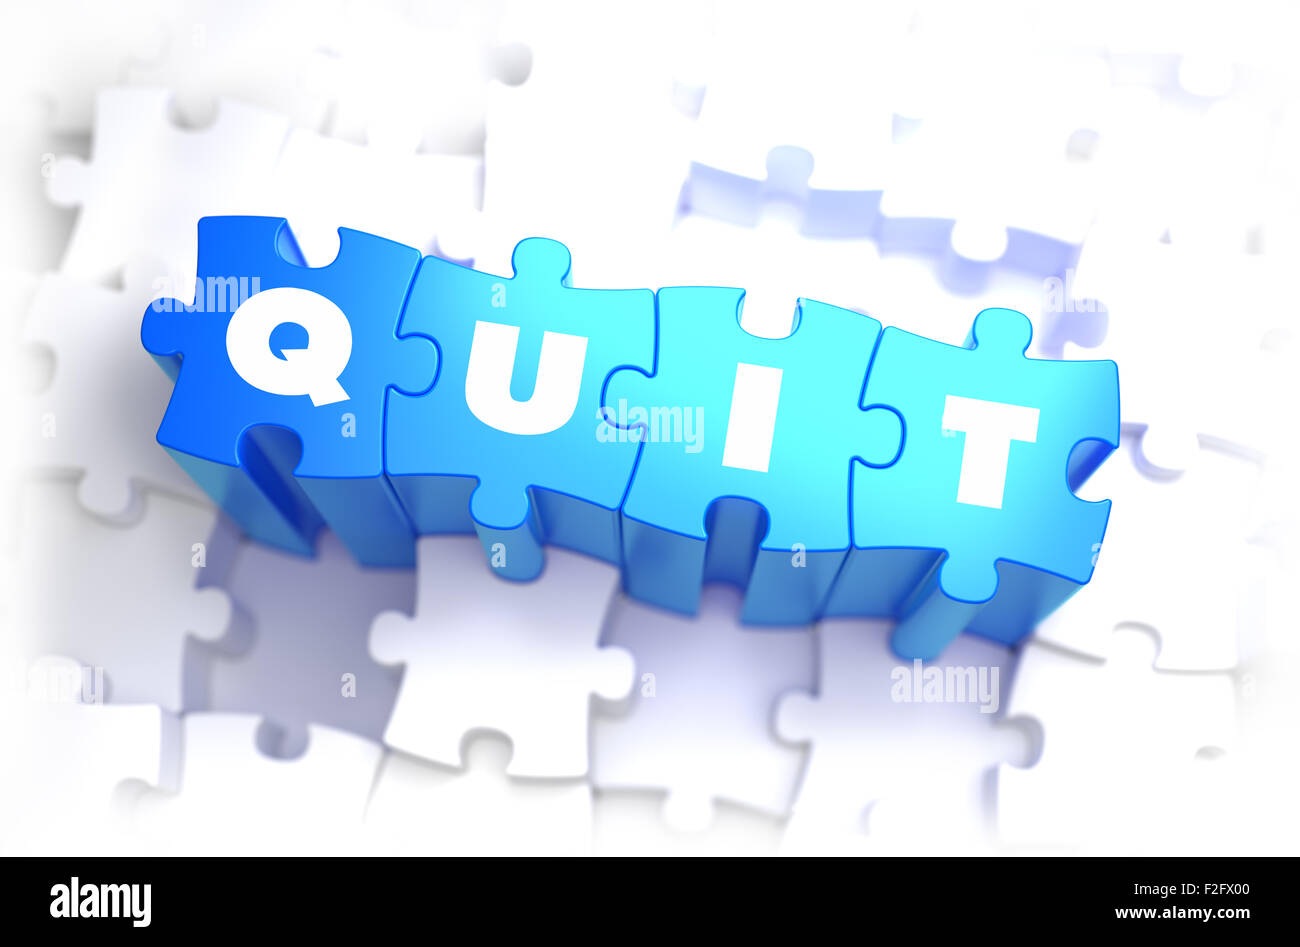 Quit - Text on Blue Puzzles on White Background. 3D Render. Stock Photo